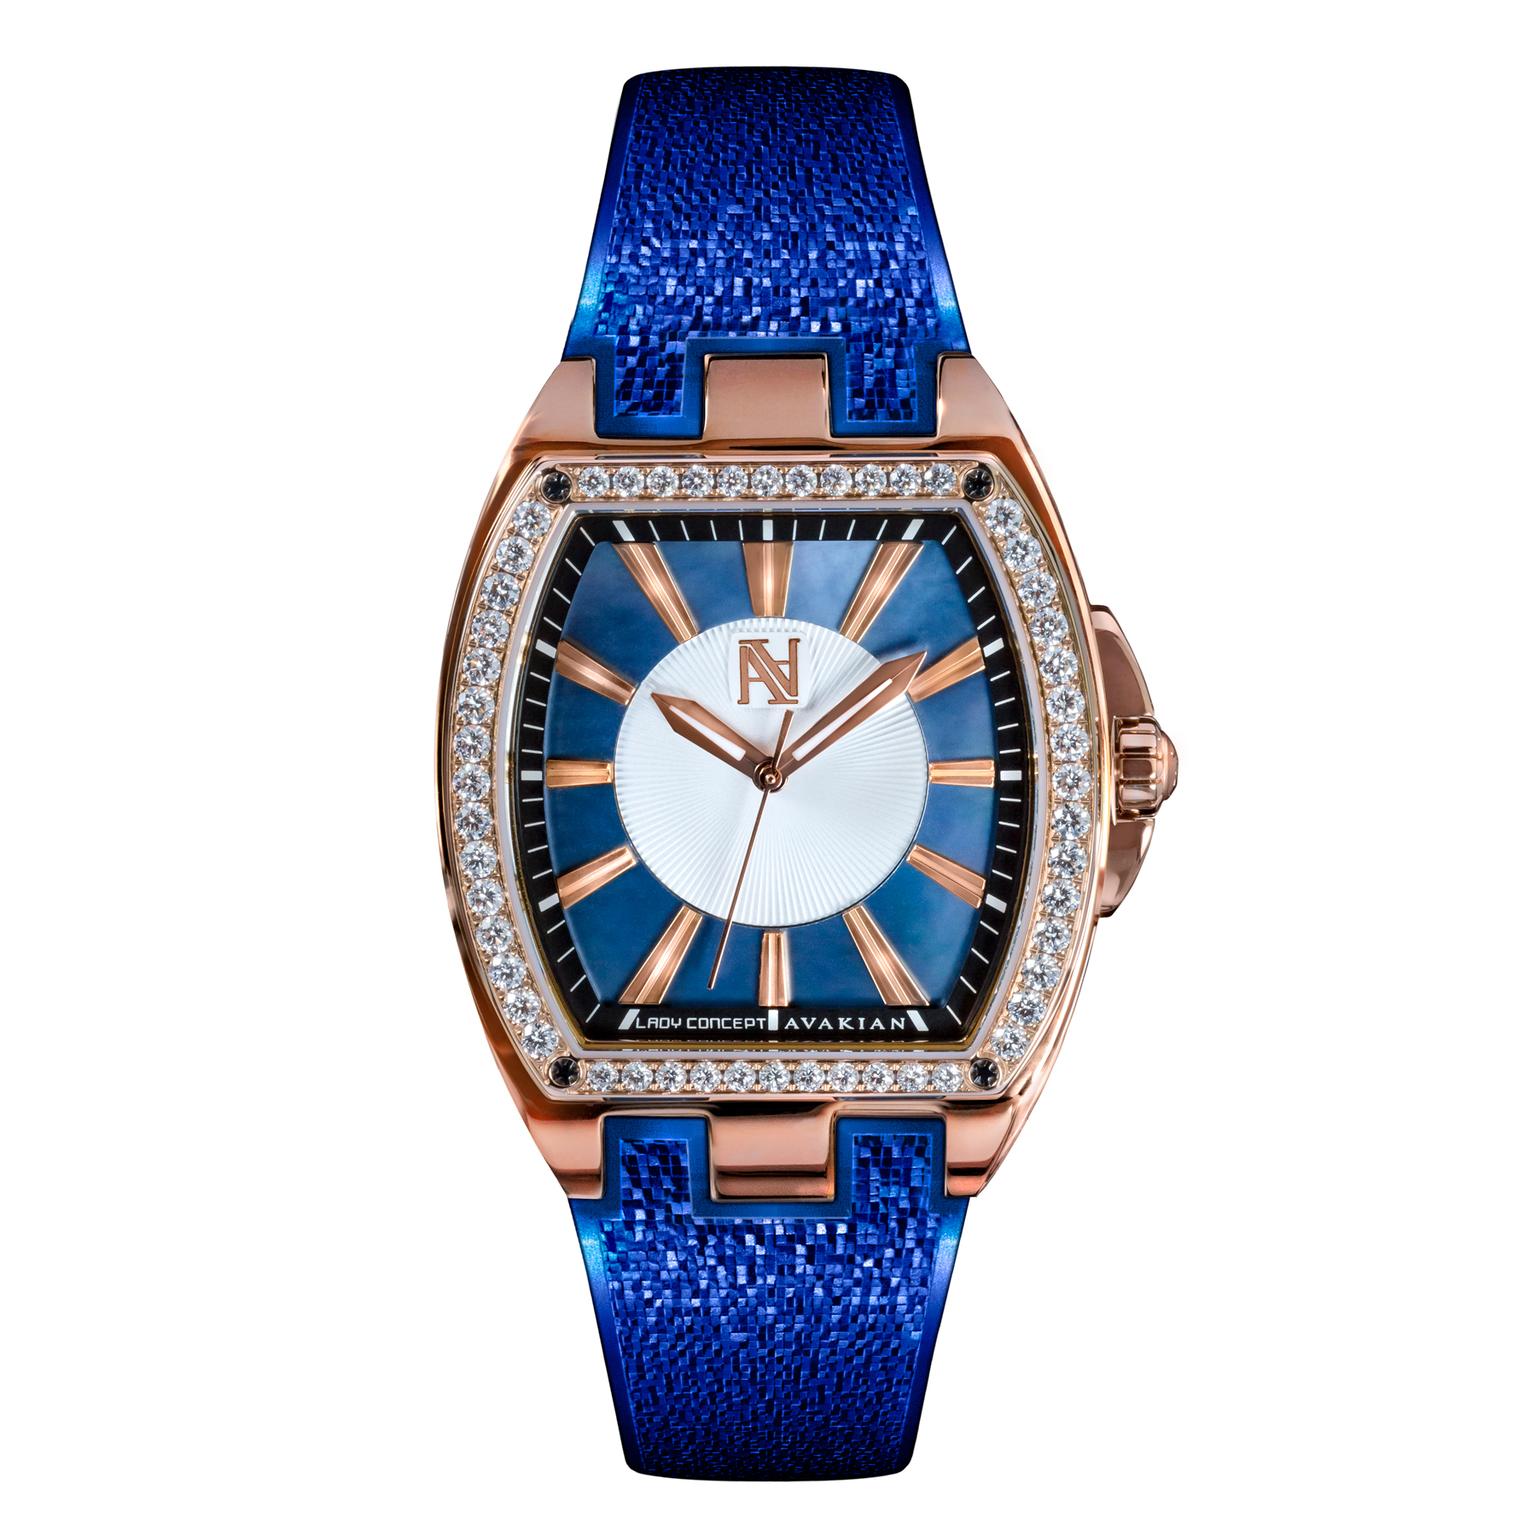 Avakian Lady Concept Blue watch